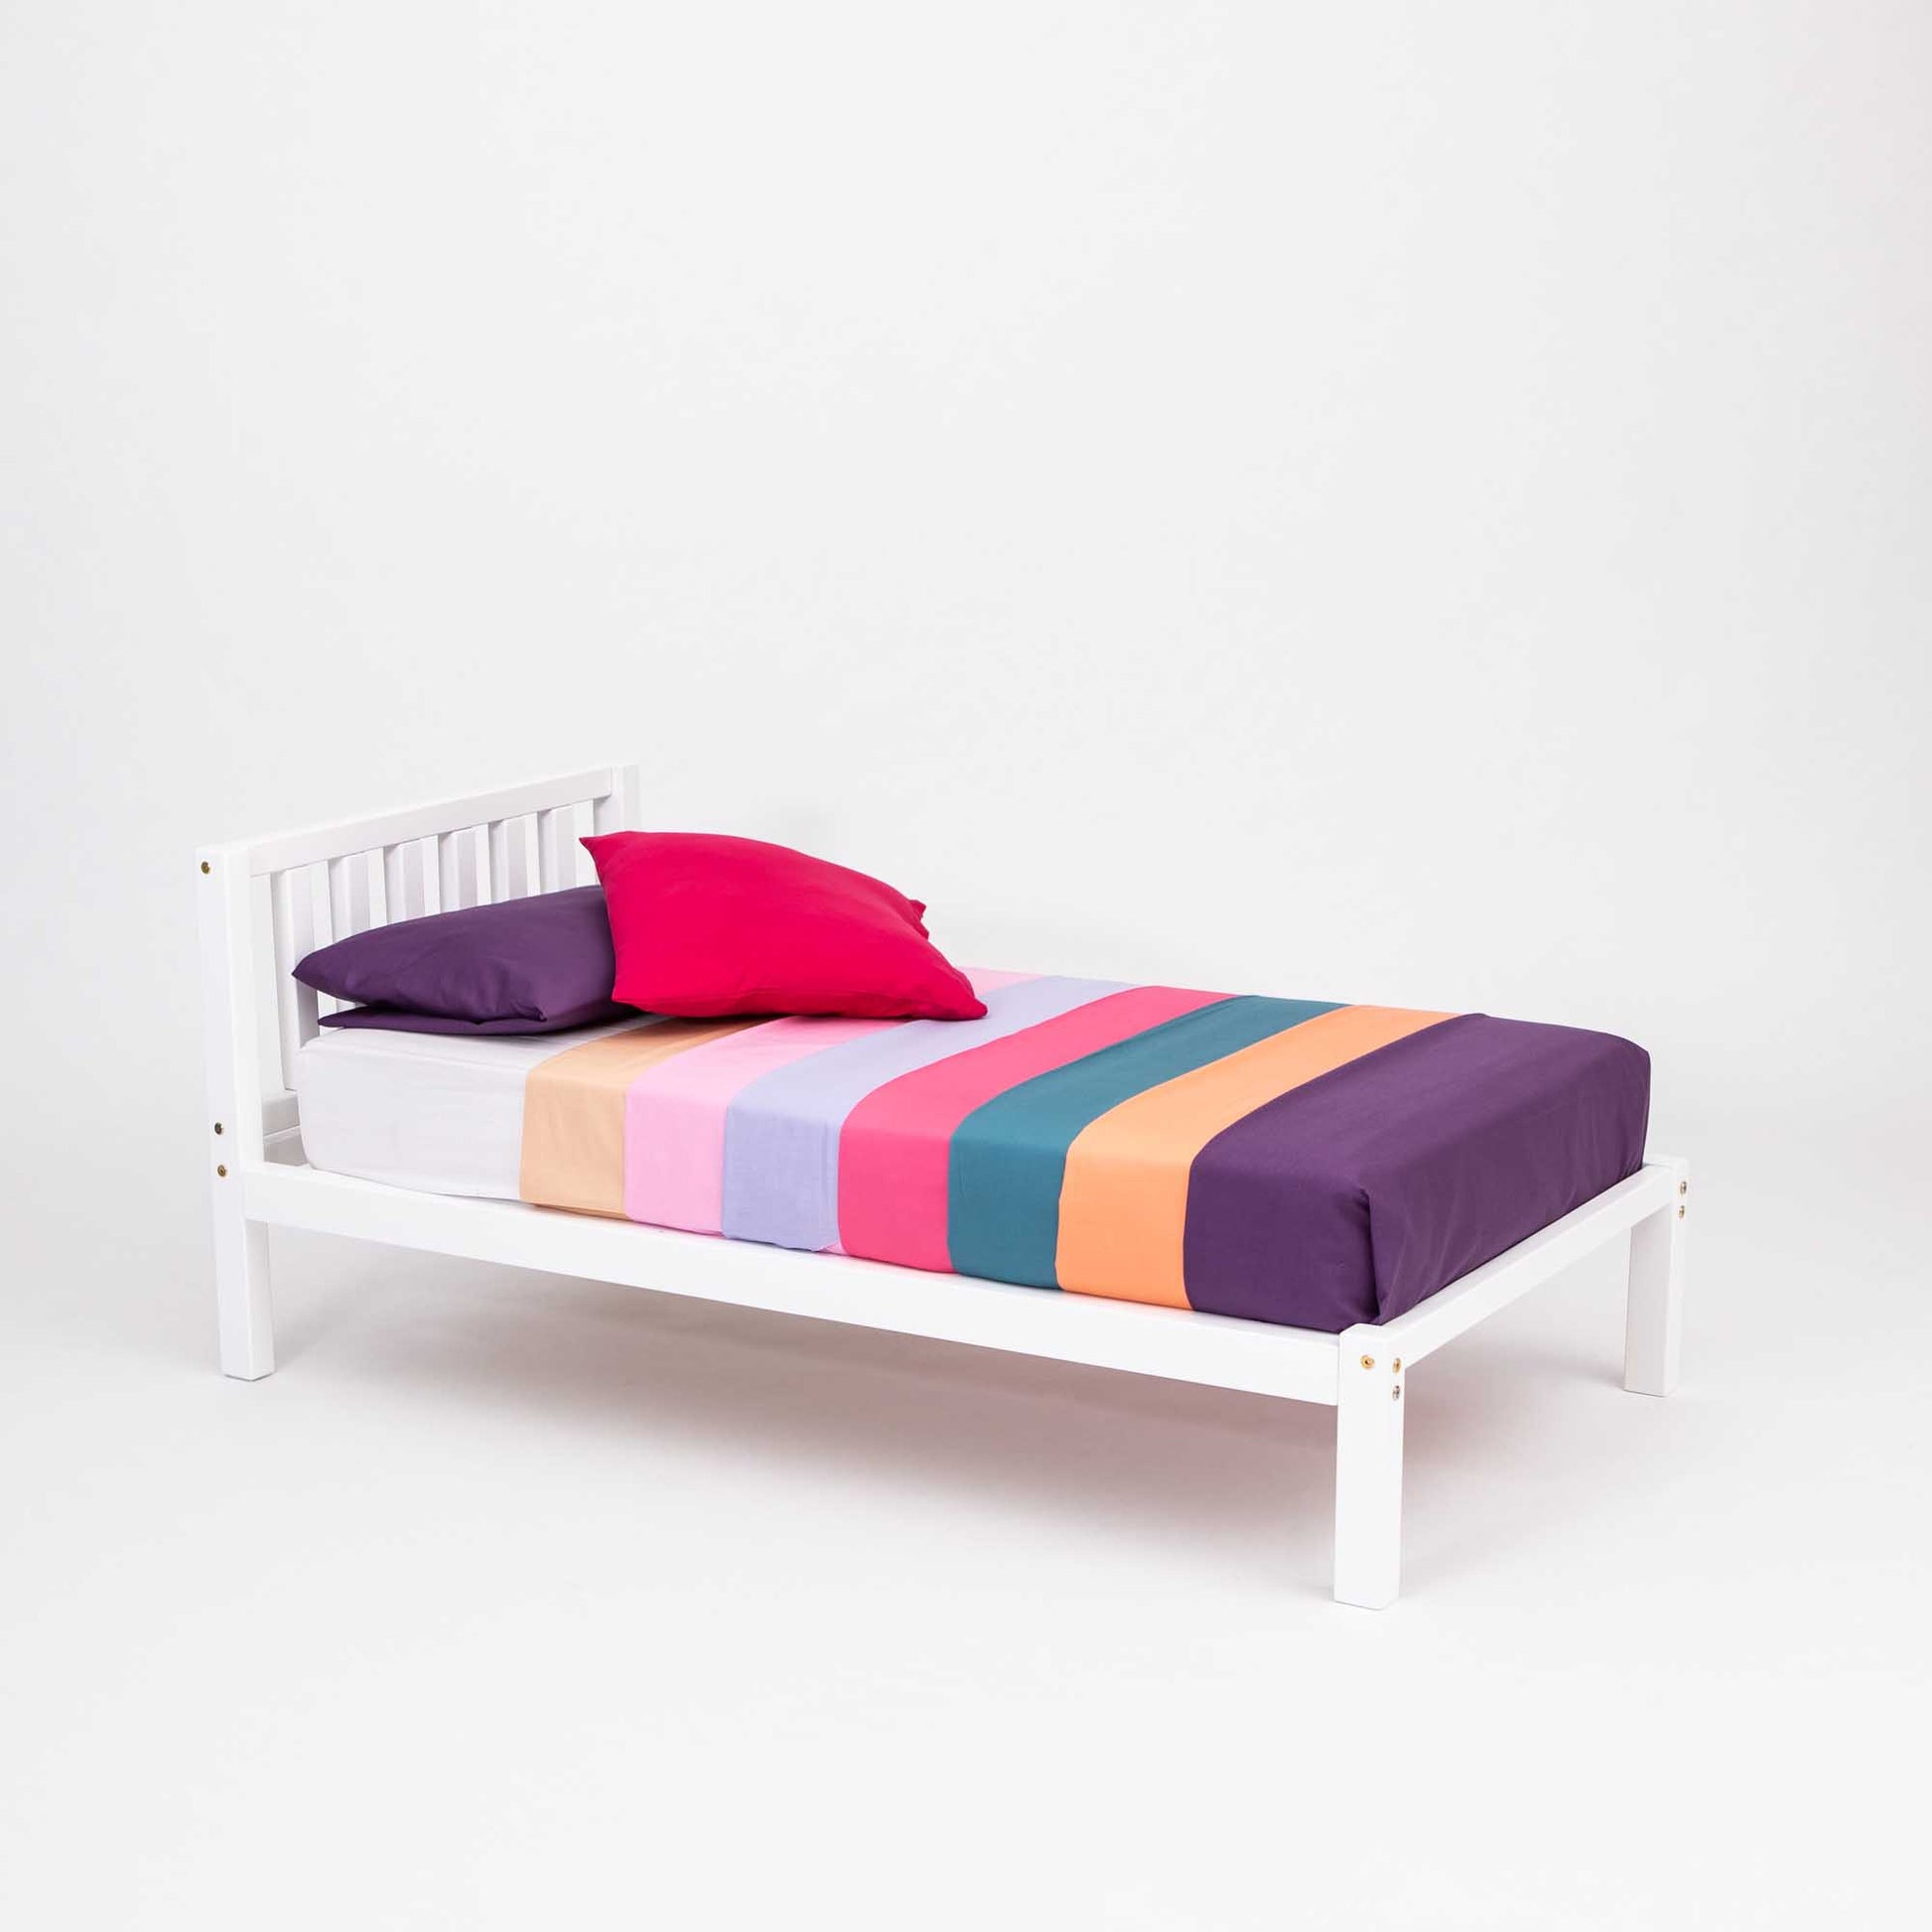 A 2-in-1 toddler bed on legs with a vertical rail headboard from Sweet Home From Wood, with colorful striped sheets.